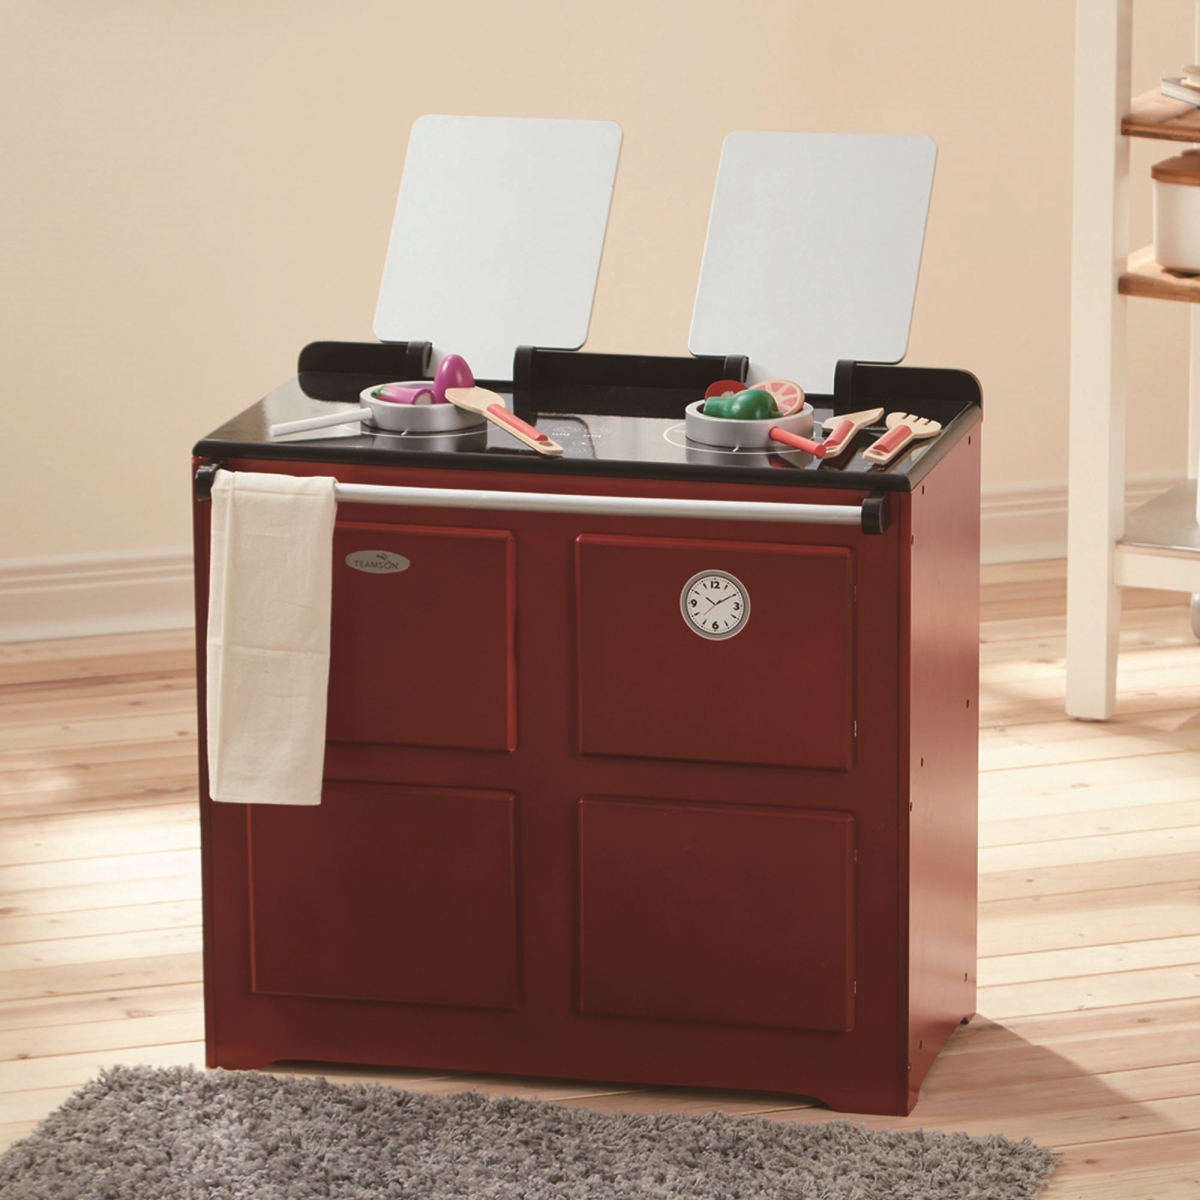 Td-12431r Little Chef Newport Classic Play Kitchen, Red